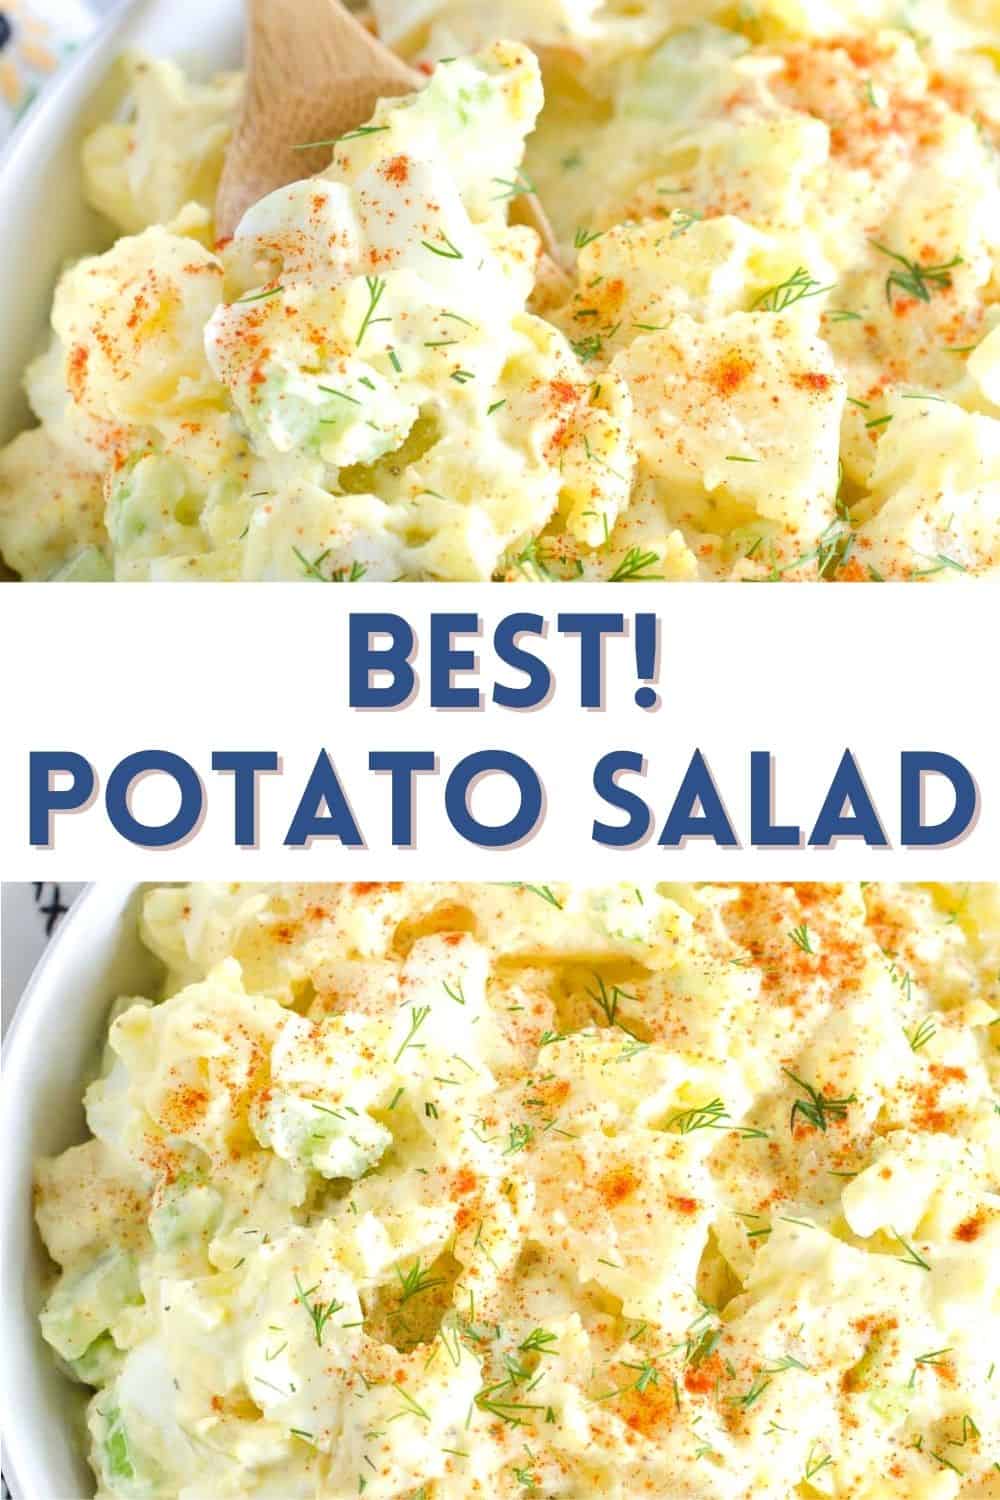 The best potato salad recipe! This is our favorite potato salad with eggs, celery, onion, pickle relish and a creamy dressing.